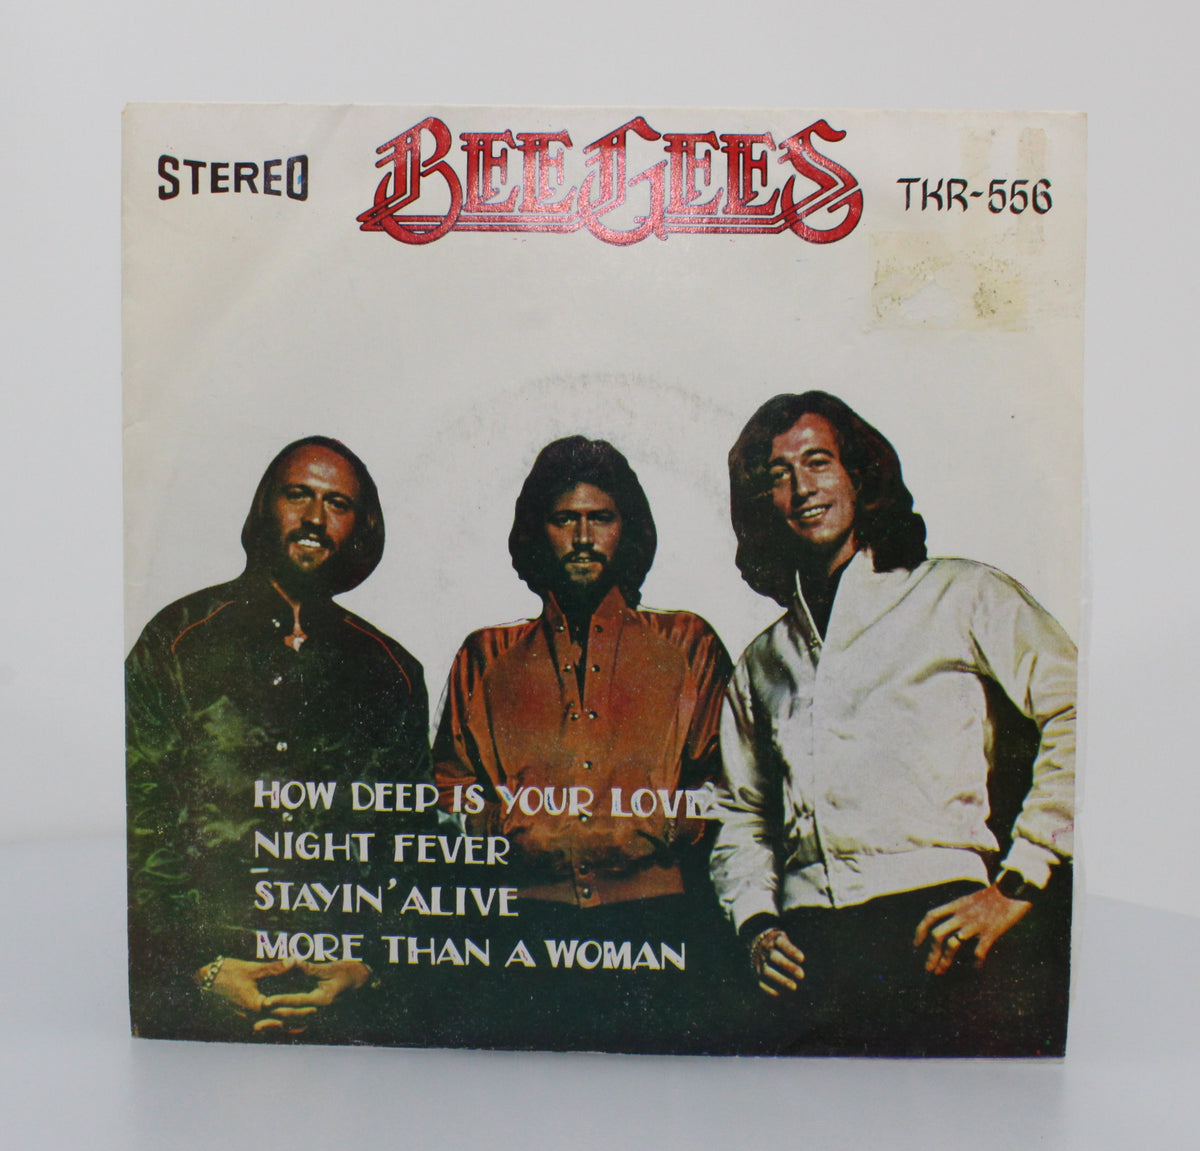 Bee Gees - How Deep Is Your Love, Vinyl Single EP 45 rpm, Thailand 1978